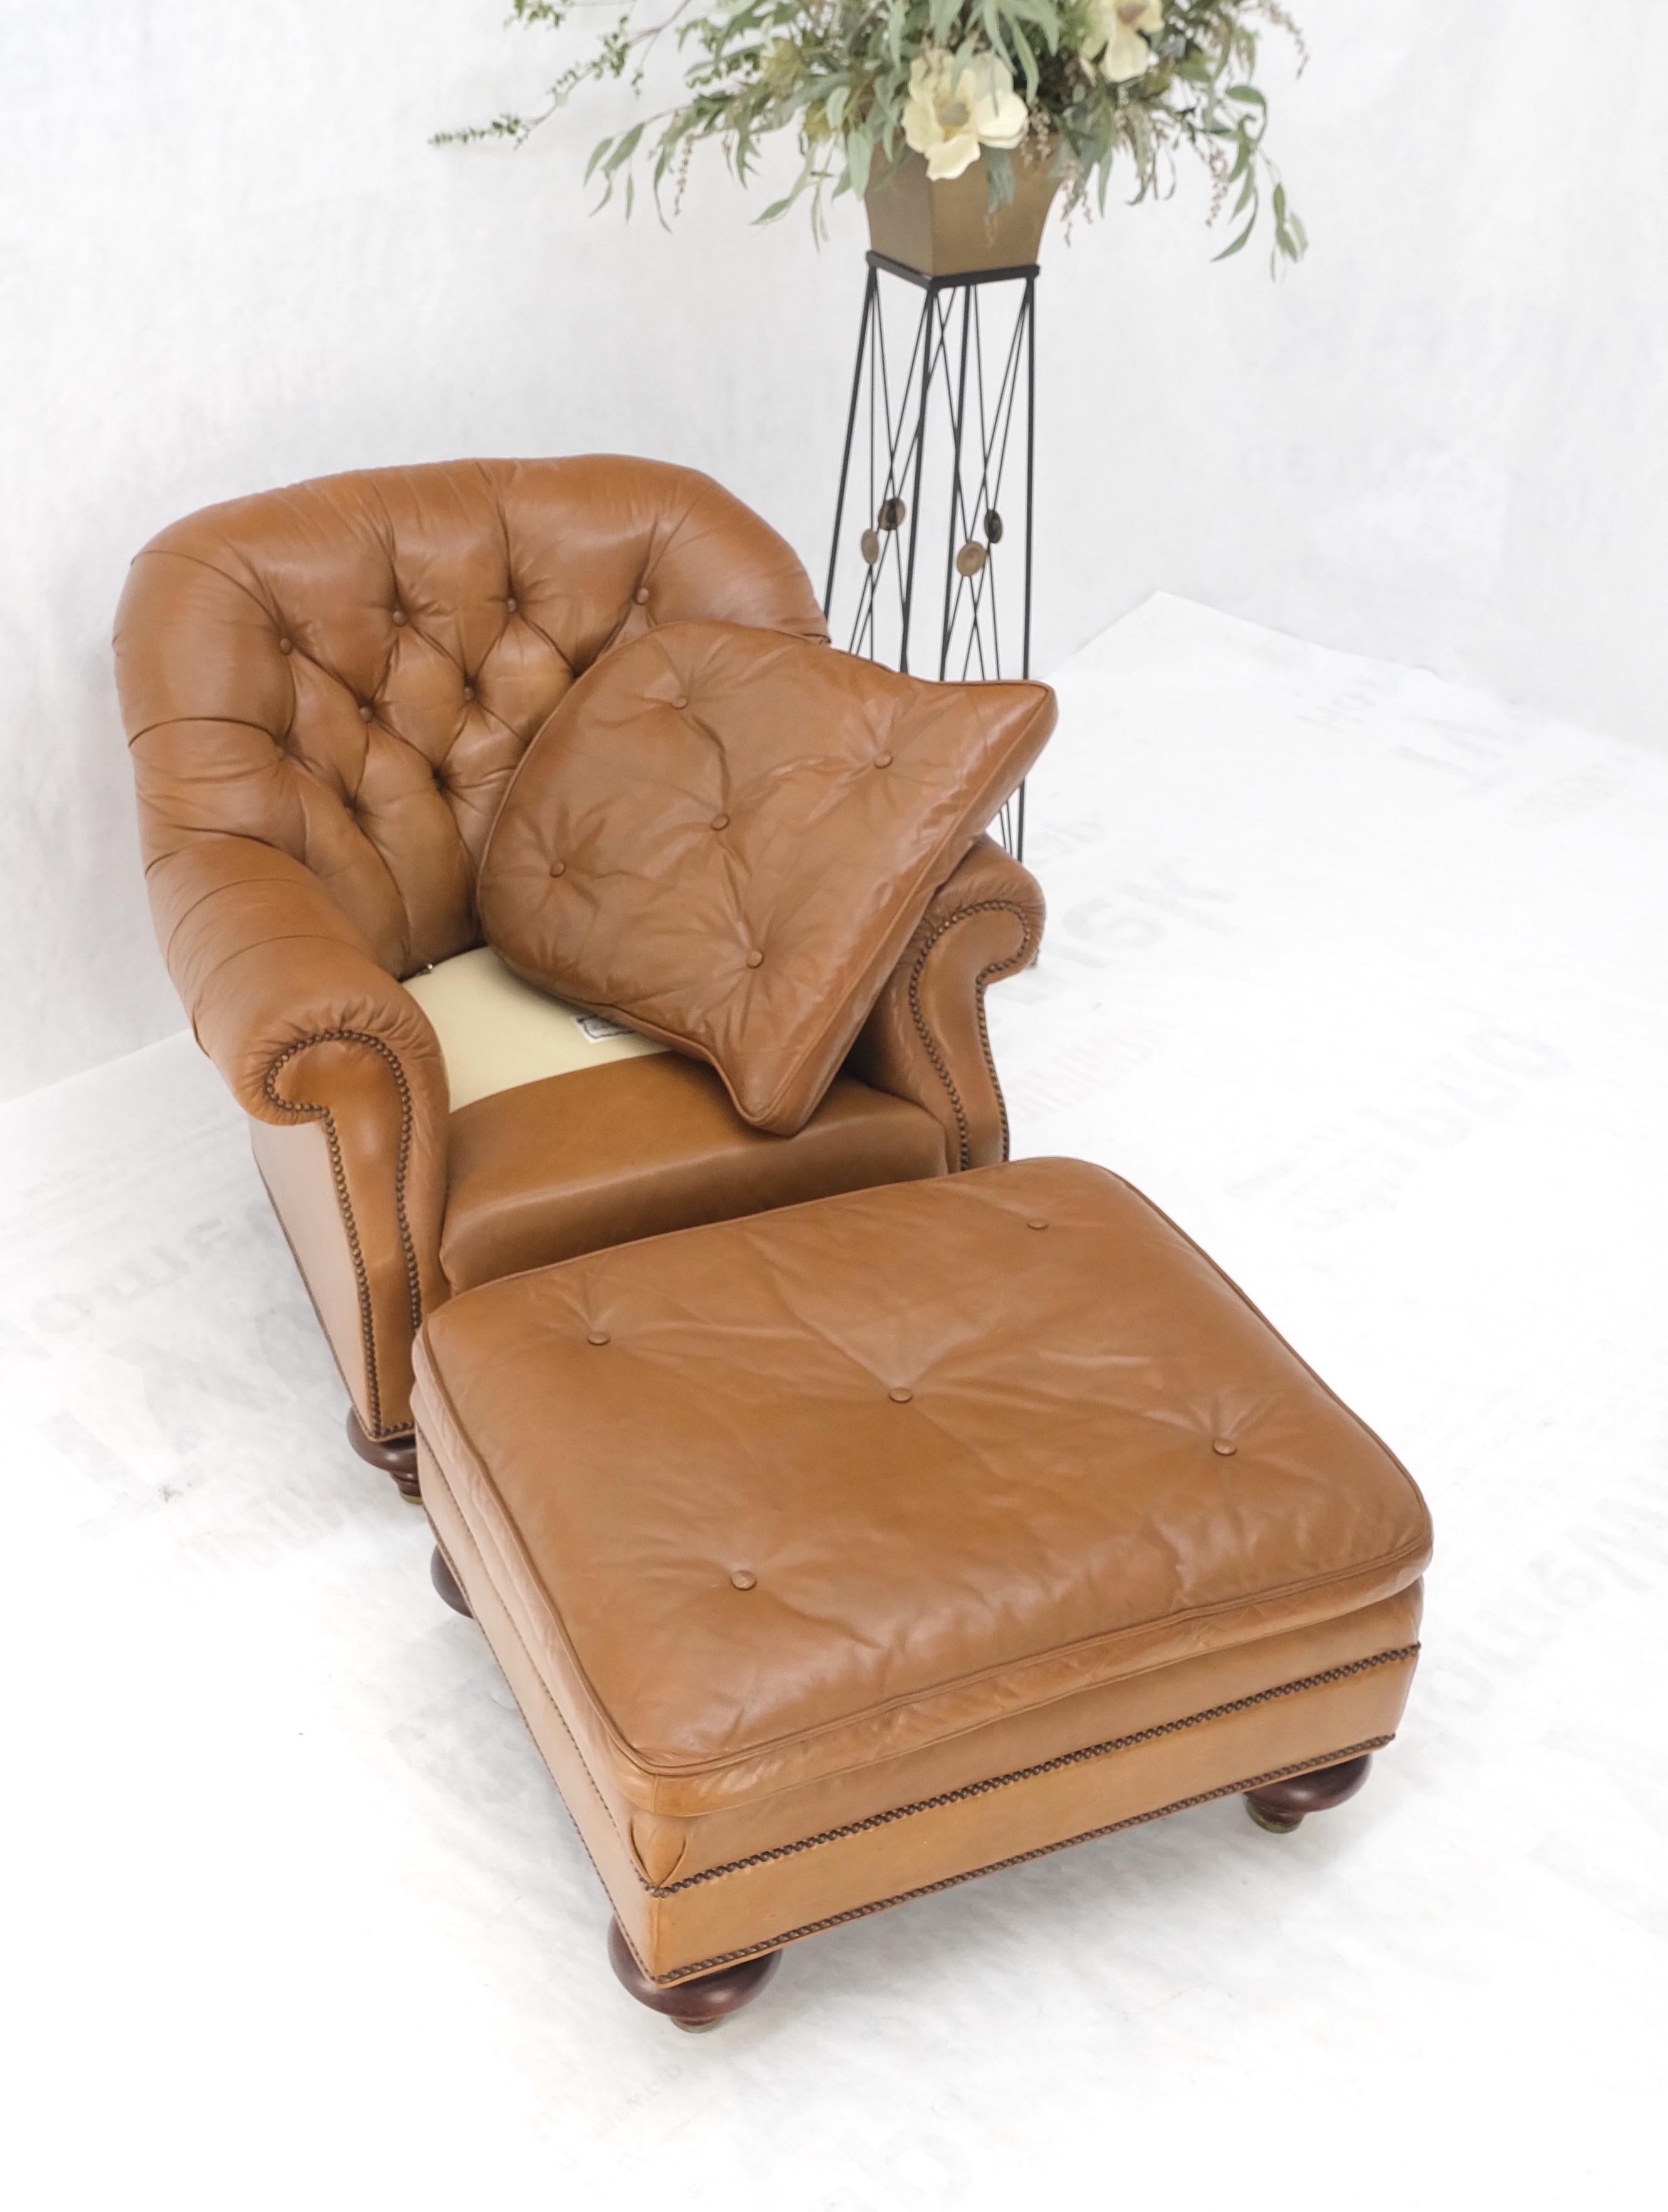 Baker Tan Leather Tufted Back Large Arm Chair w/ Ottoman Pouf Turned Legs MINT! For Sale 1